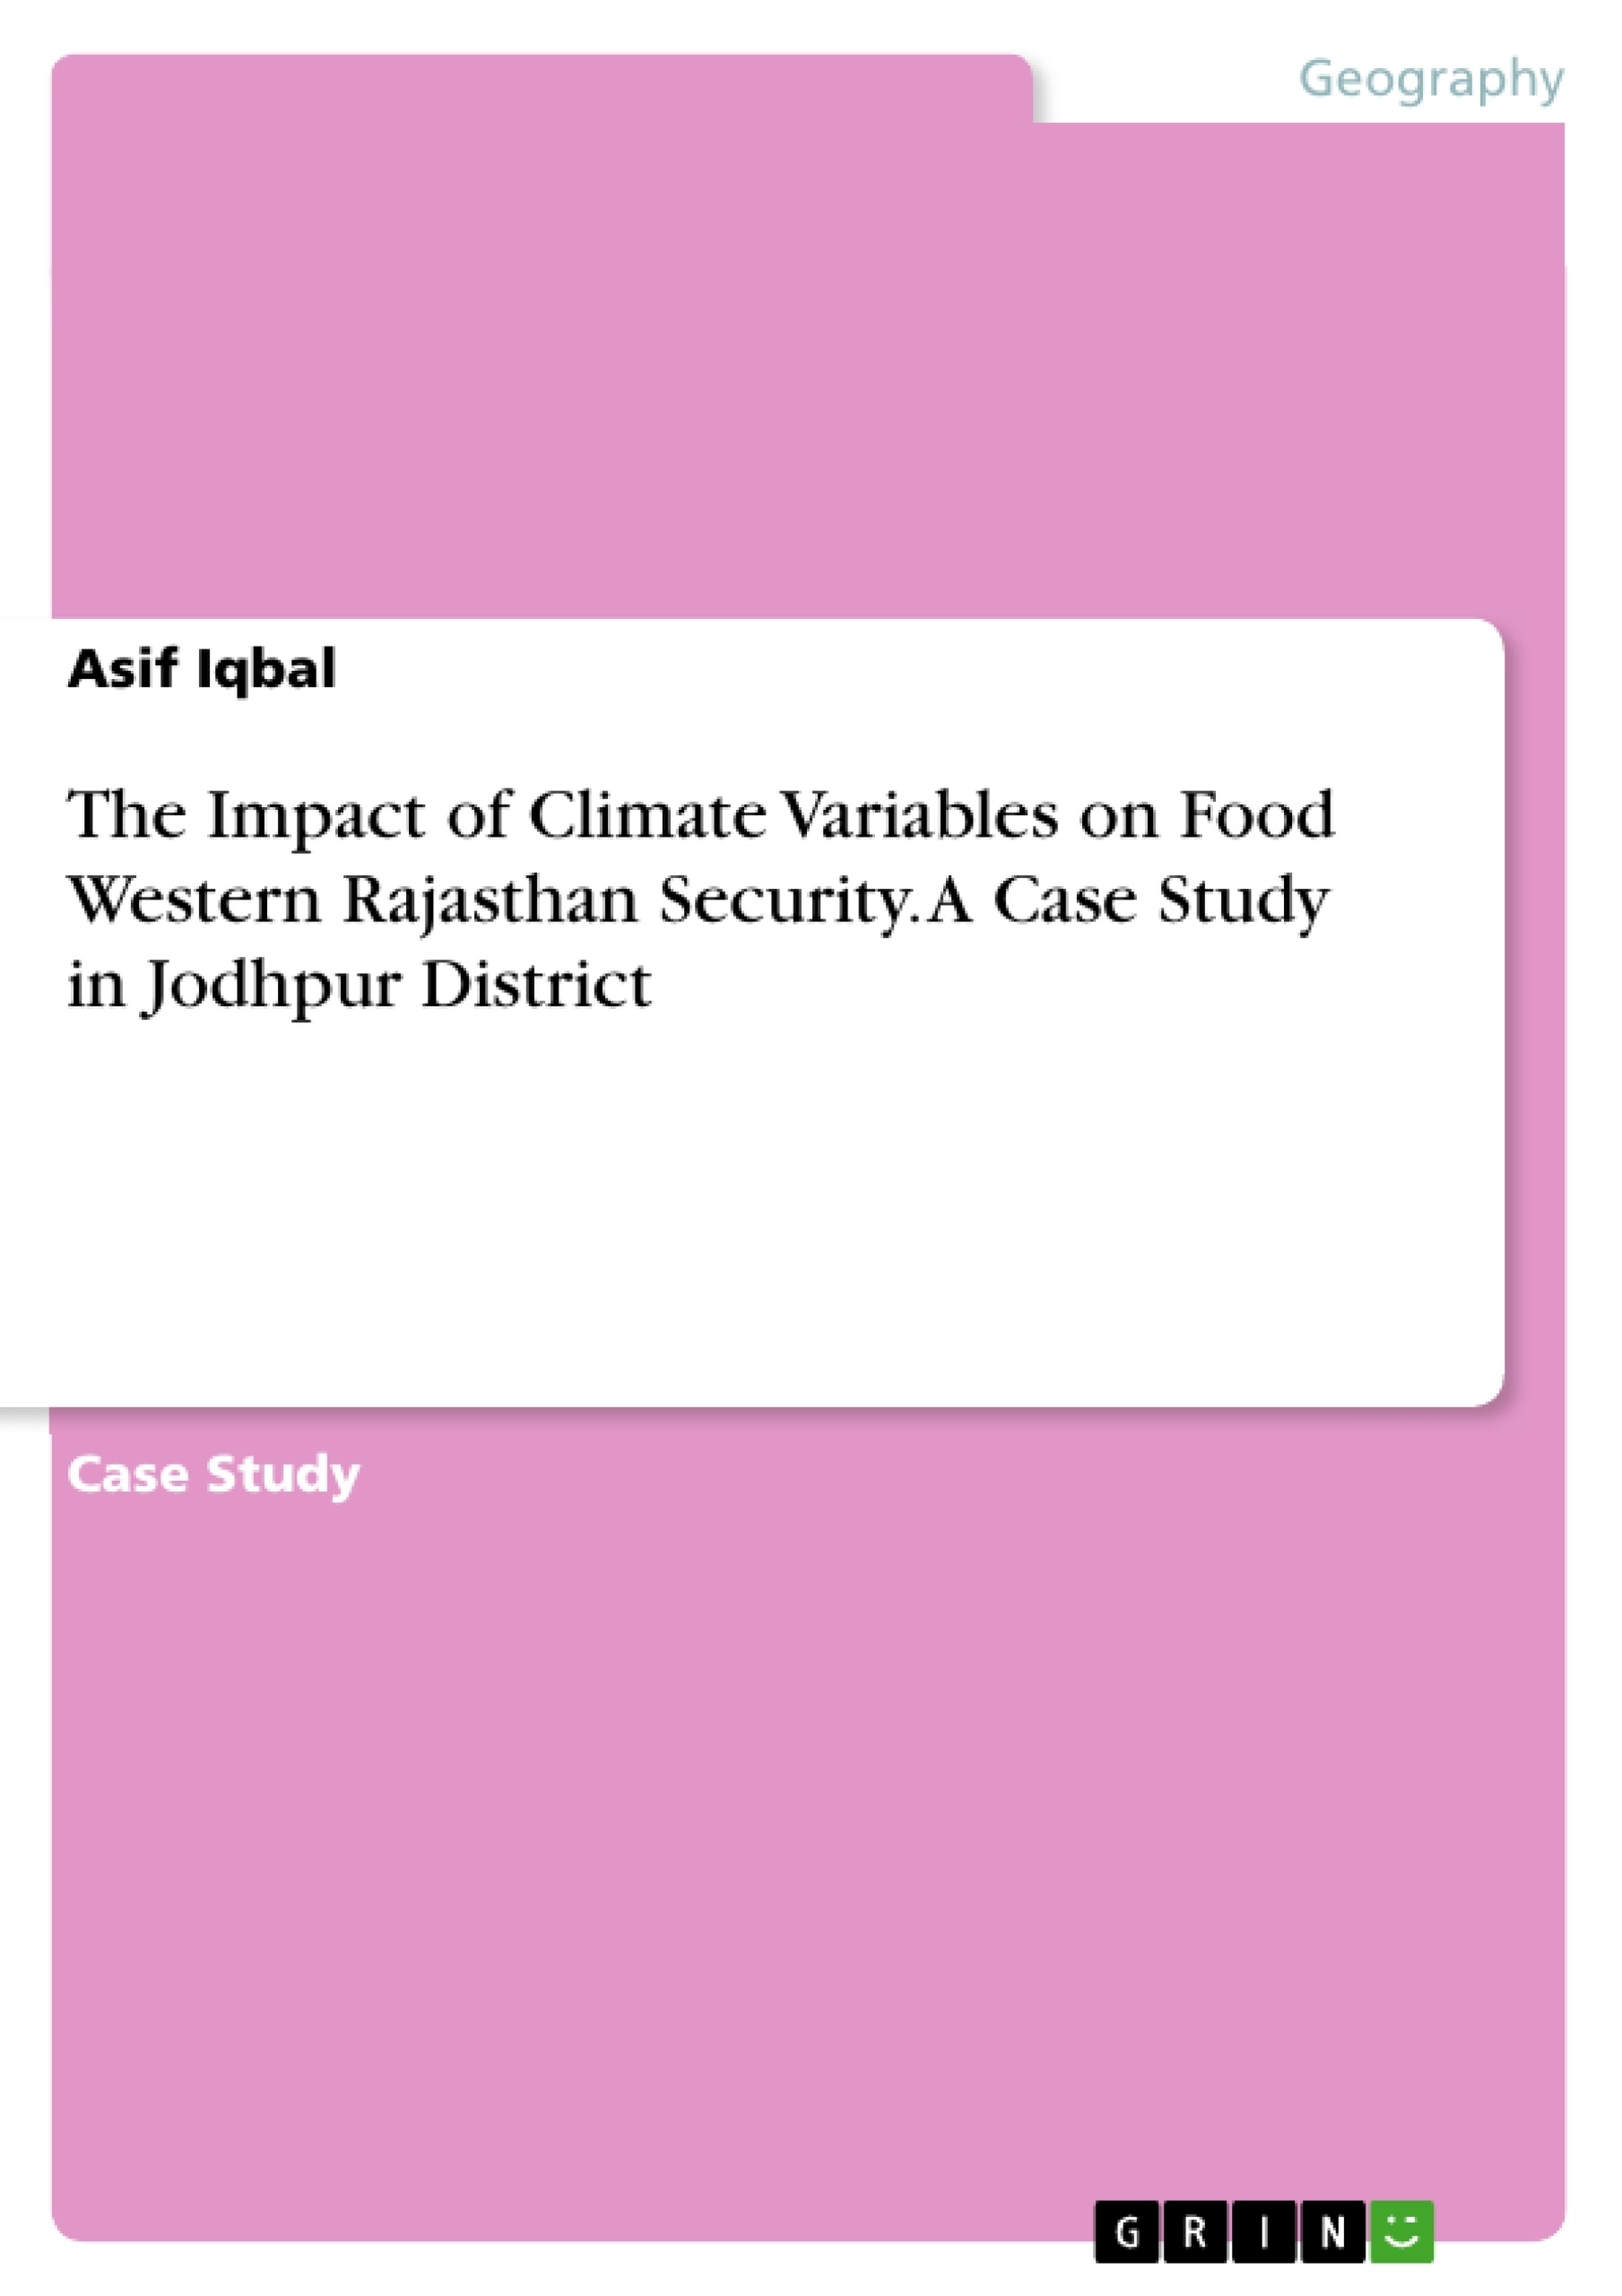 Title: The Impact of Climate Variables on Food Western Rajasthan Security. A Case Study in Jodhpur District